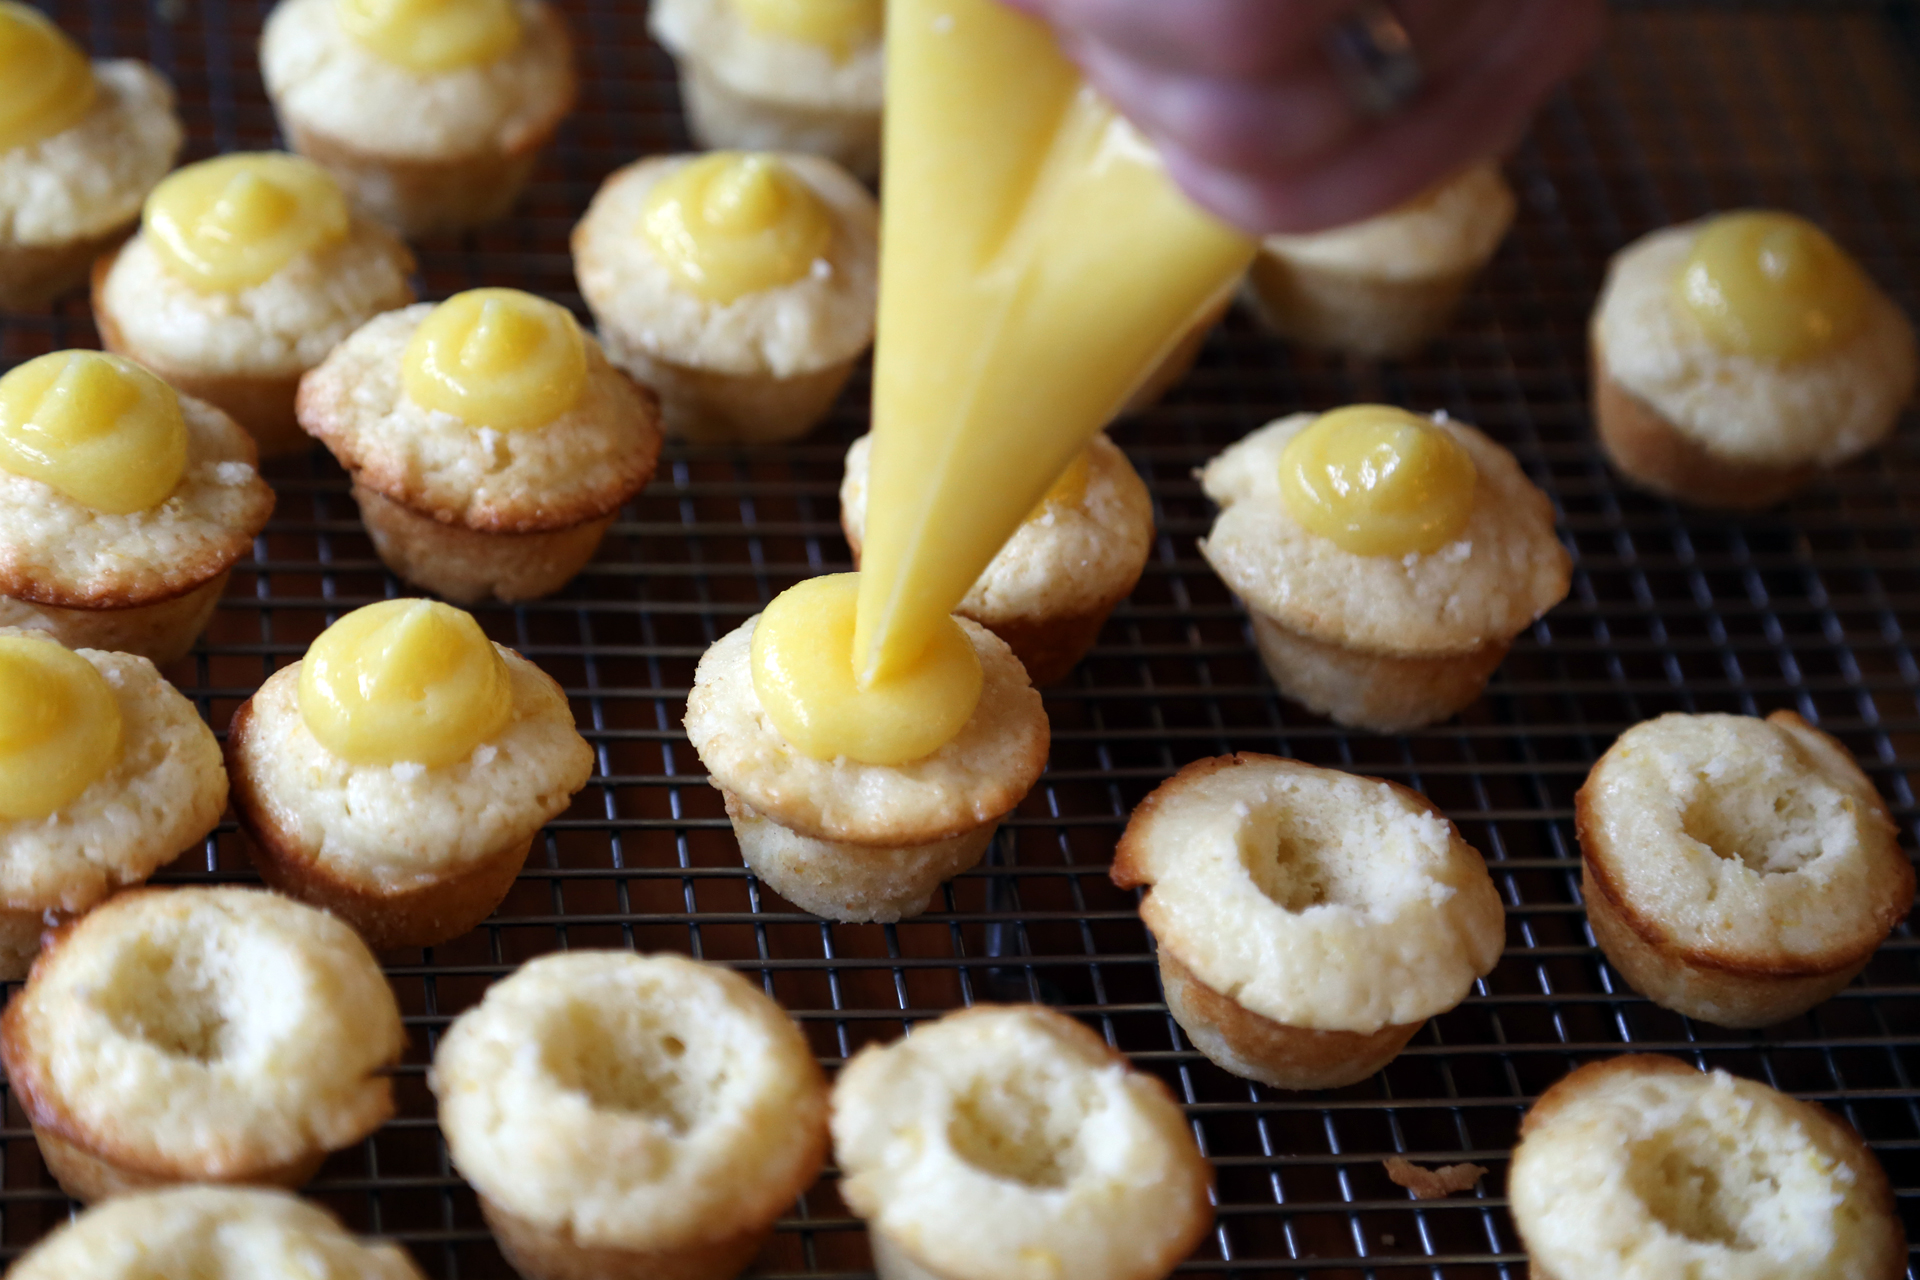 Scoop the lemon curd into a pastry bag that is fitted with a plain tip or without a tip. Pipe the curd into the cup in the cupcake, letting it mound on the top.